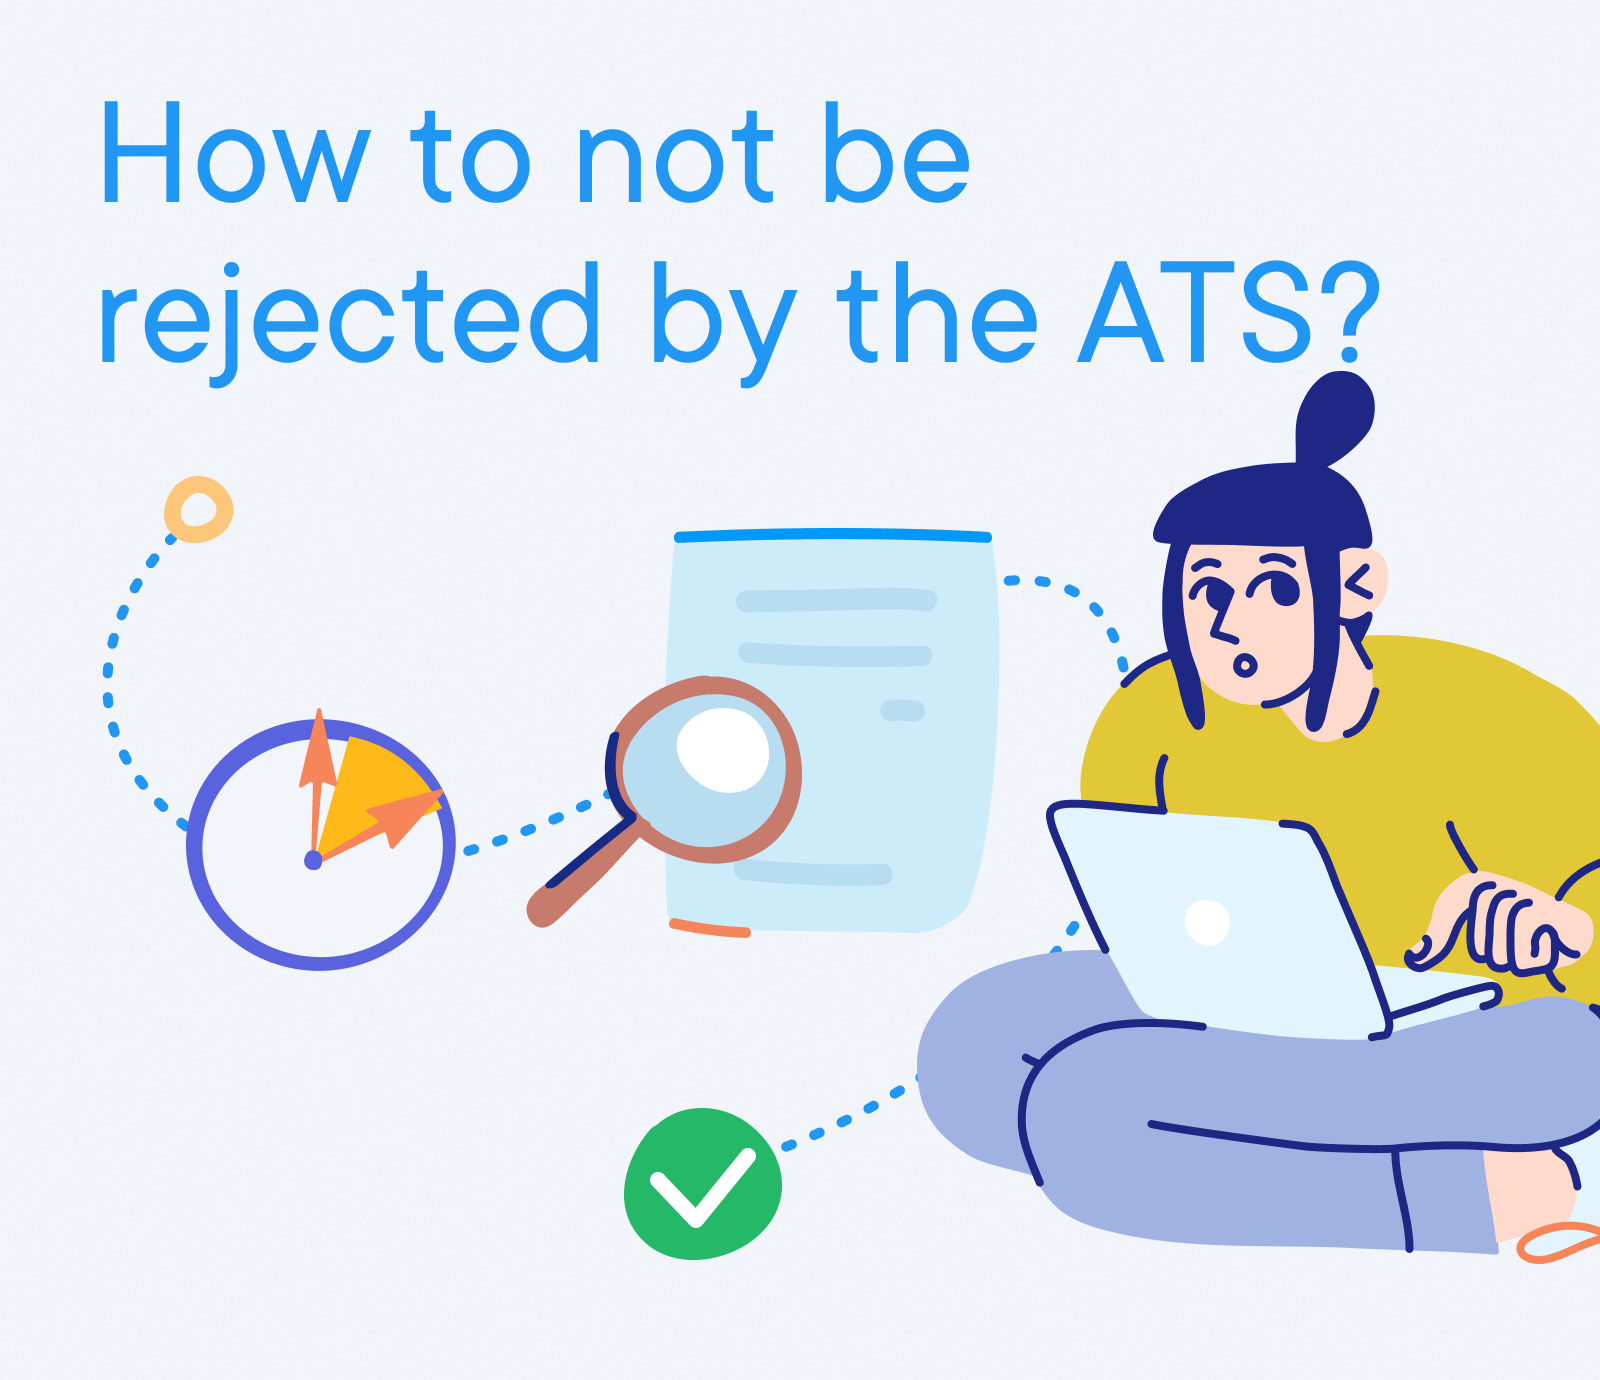 Mechanic - How to not be rejected by the ATS?